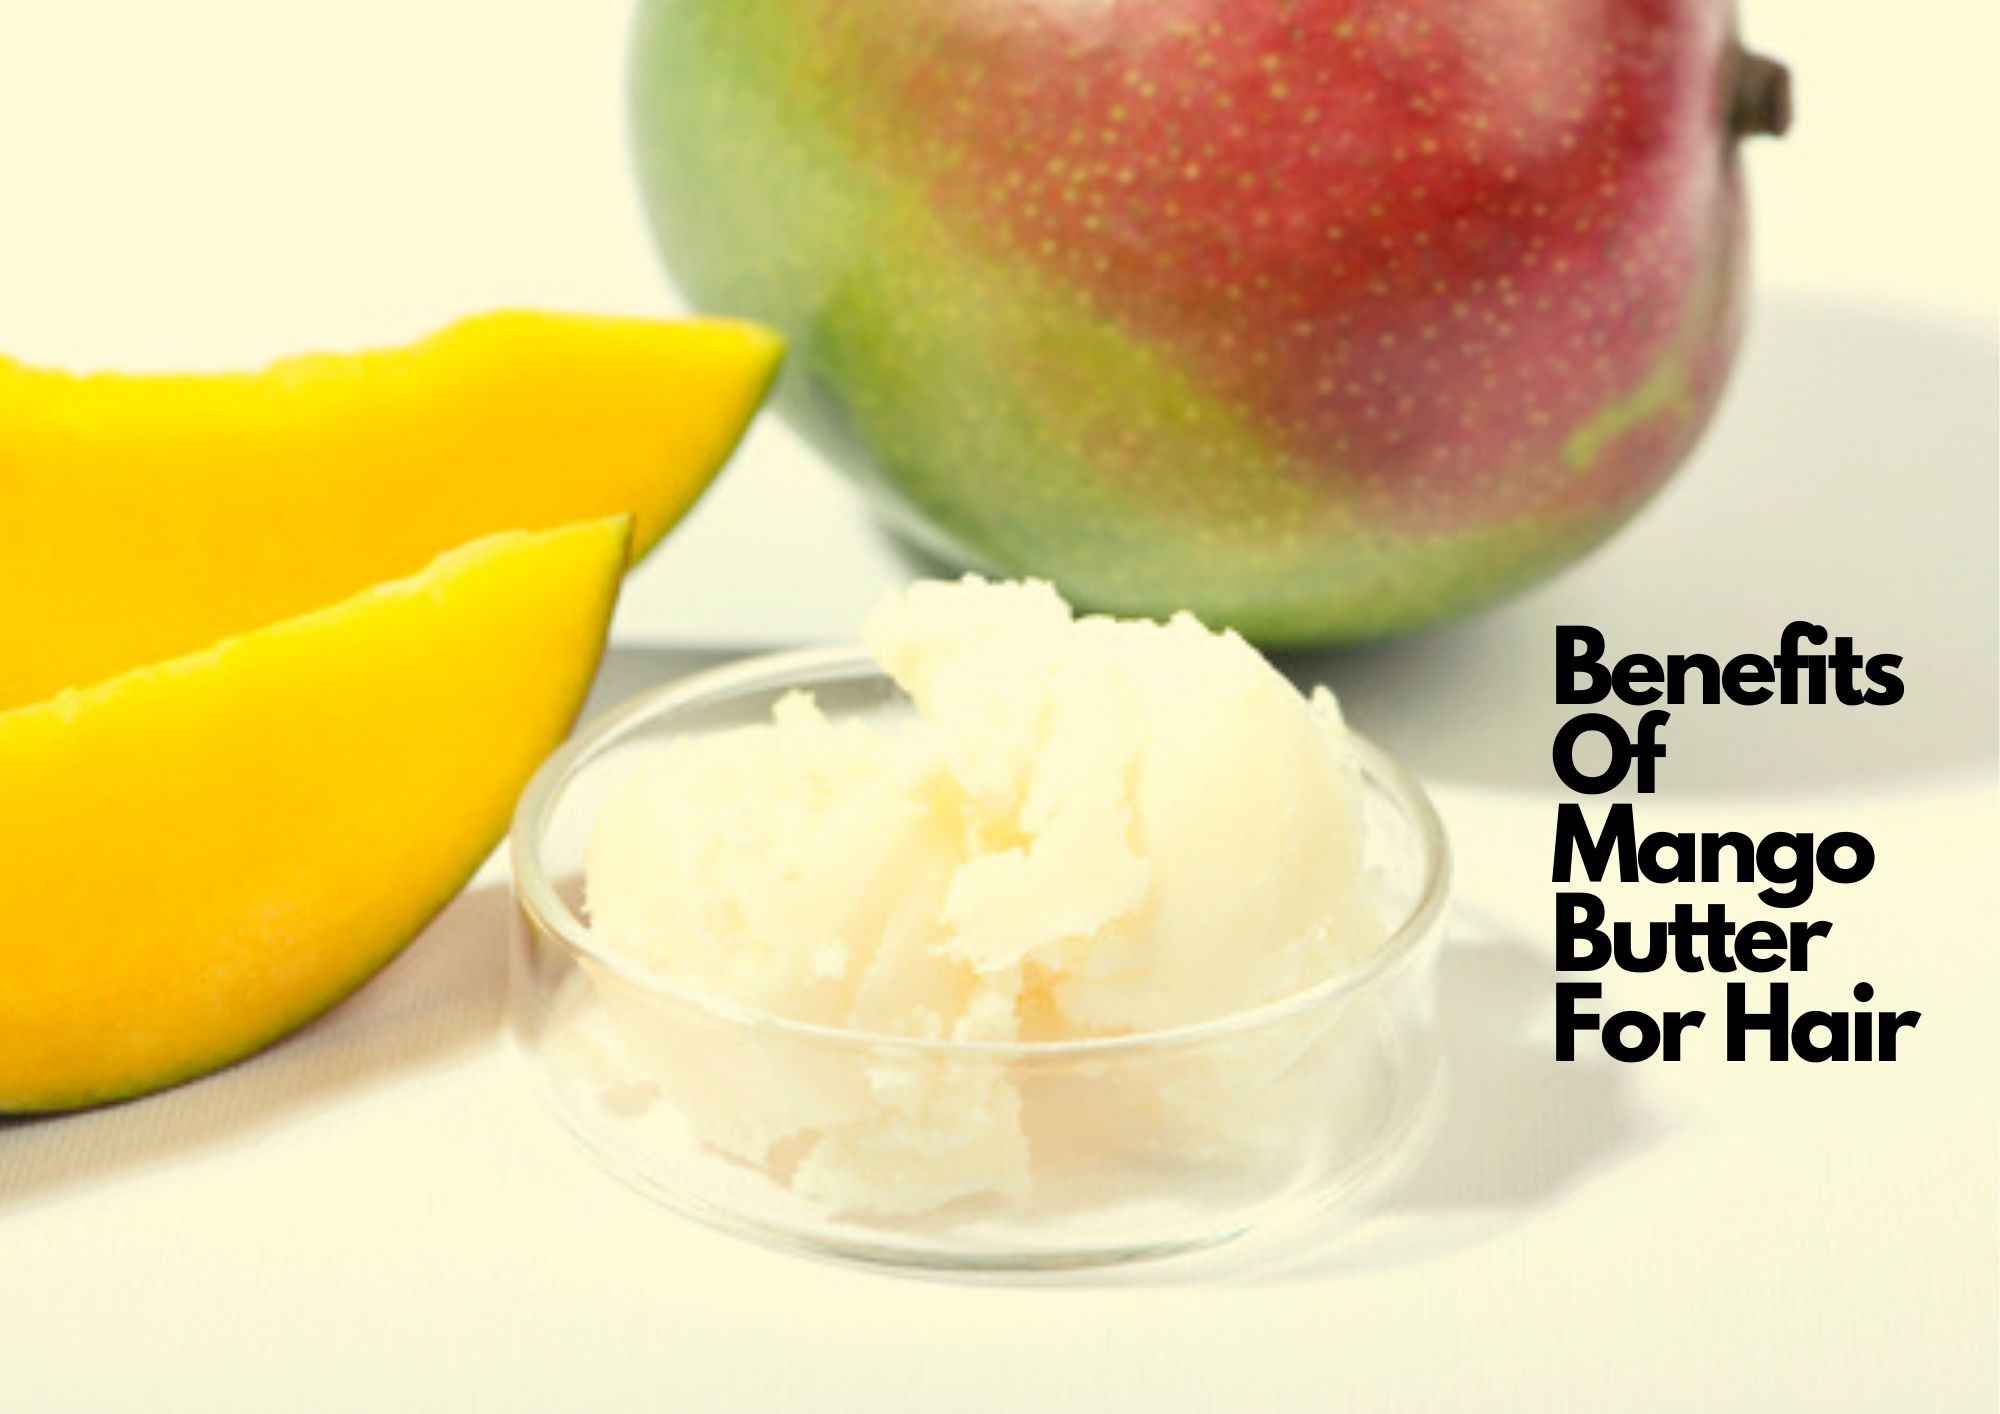 7 Important Mango Butter Benefits For Hair 2023 | How To Use & More - Hair  Everyday Review